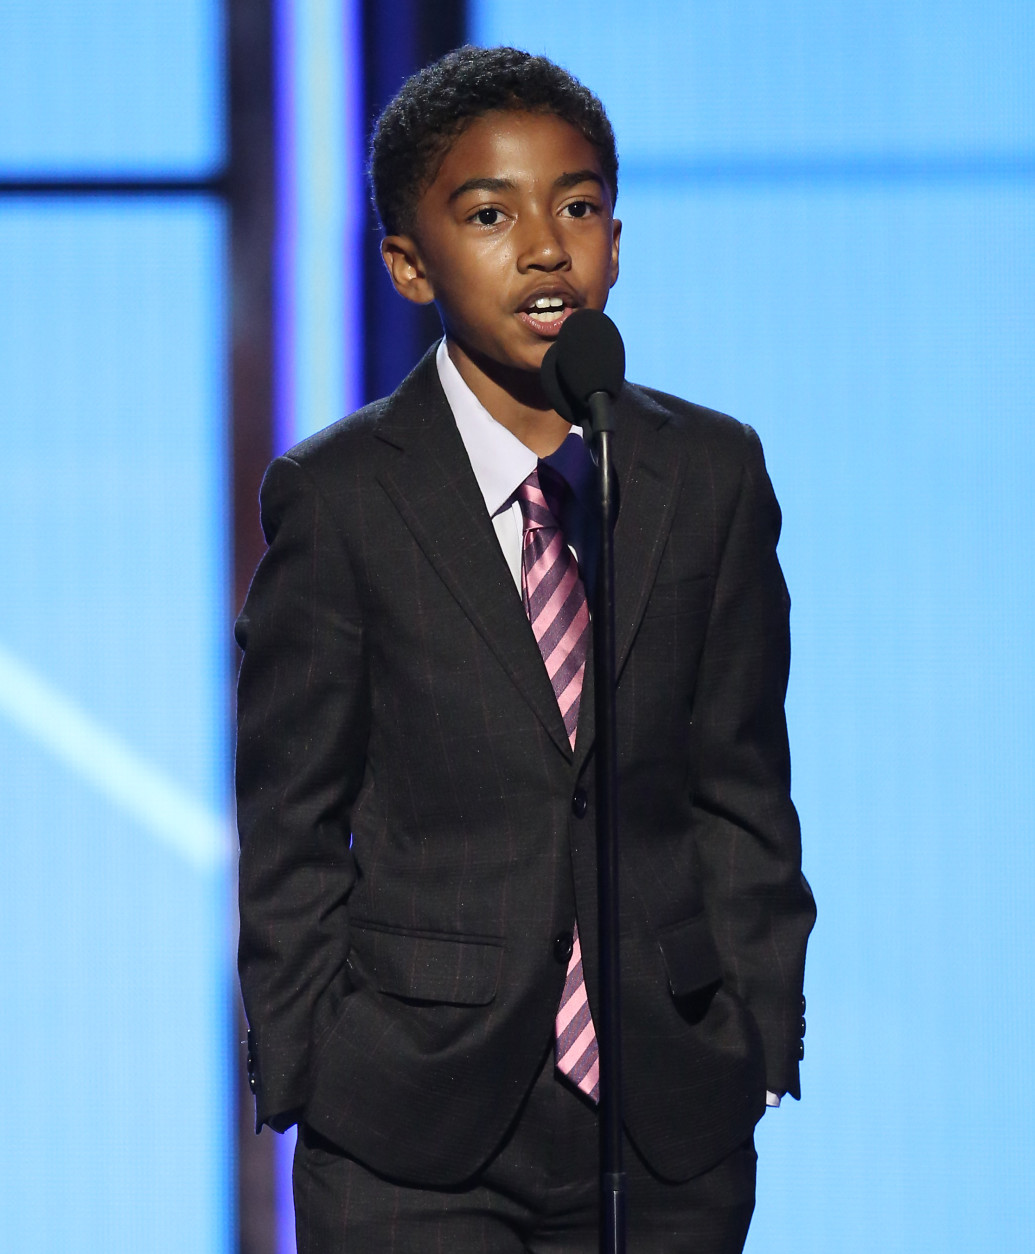 Miles Brown speaks at the BET Awards at the Microsoft Theater on Sunday, June 26, 2016, in Los Angeles. (Photo by Matt Sayles/Invision/AP)